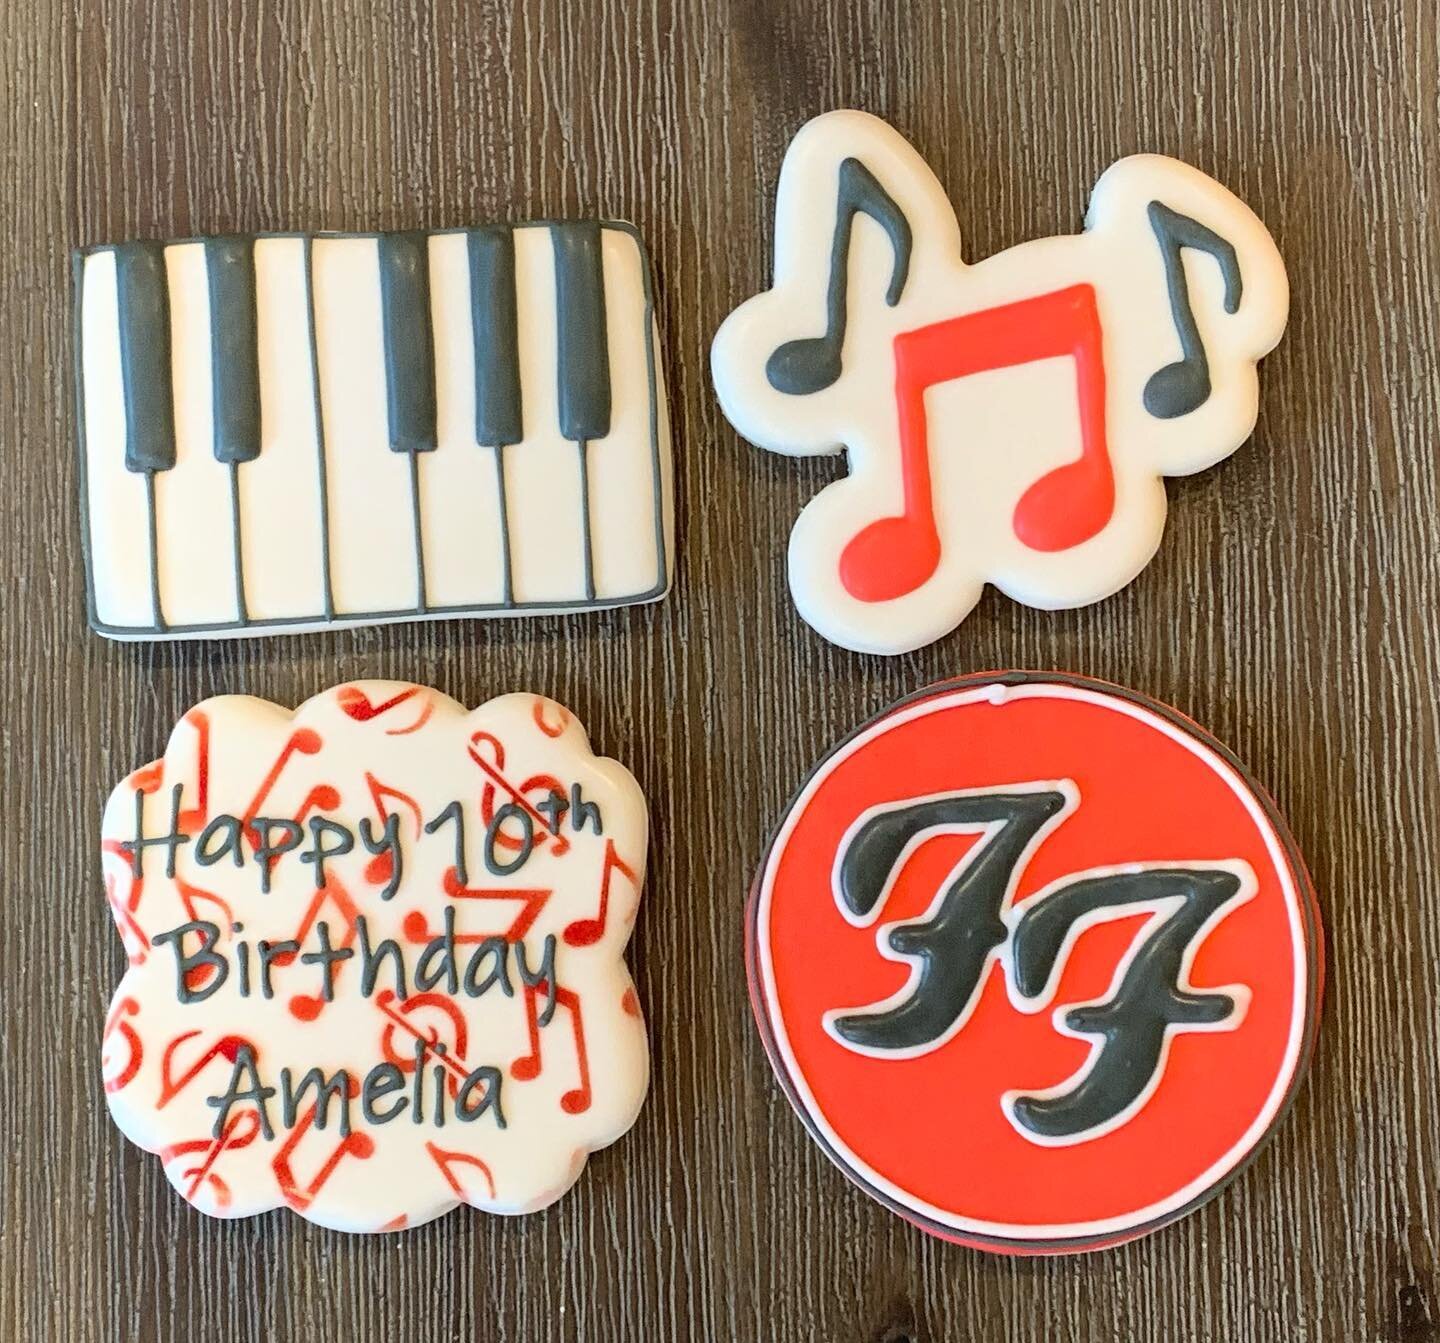 Birthday cookies for my @foofighters loving, #piano playing, music obsessed 10 year old. She is so damn cool ❤️
.
.
.
.
.
.
#birthdaycookies #musiccookies #foofighters #foofighterscookies #denvercookies #customcookies #cookiesofinstagram #decoratedco